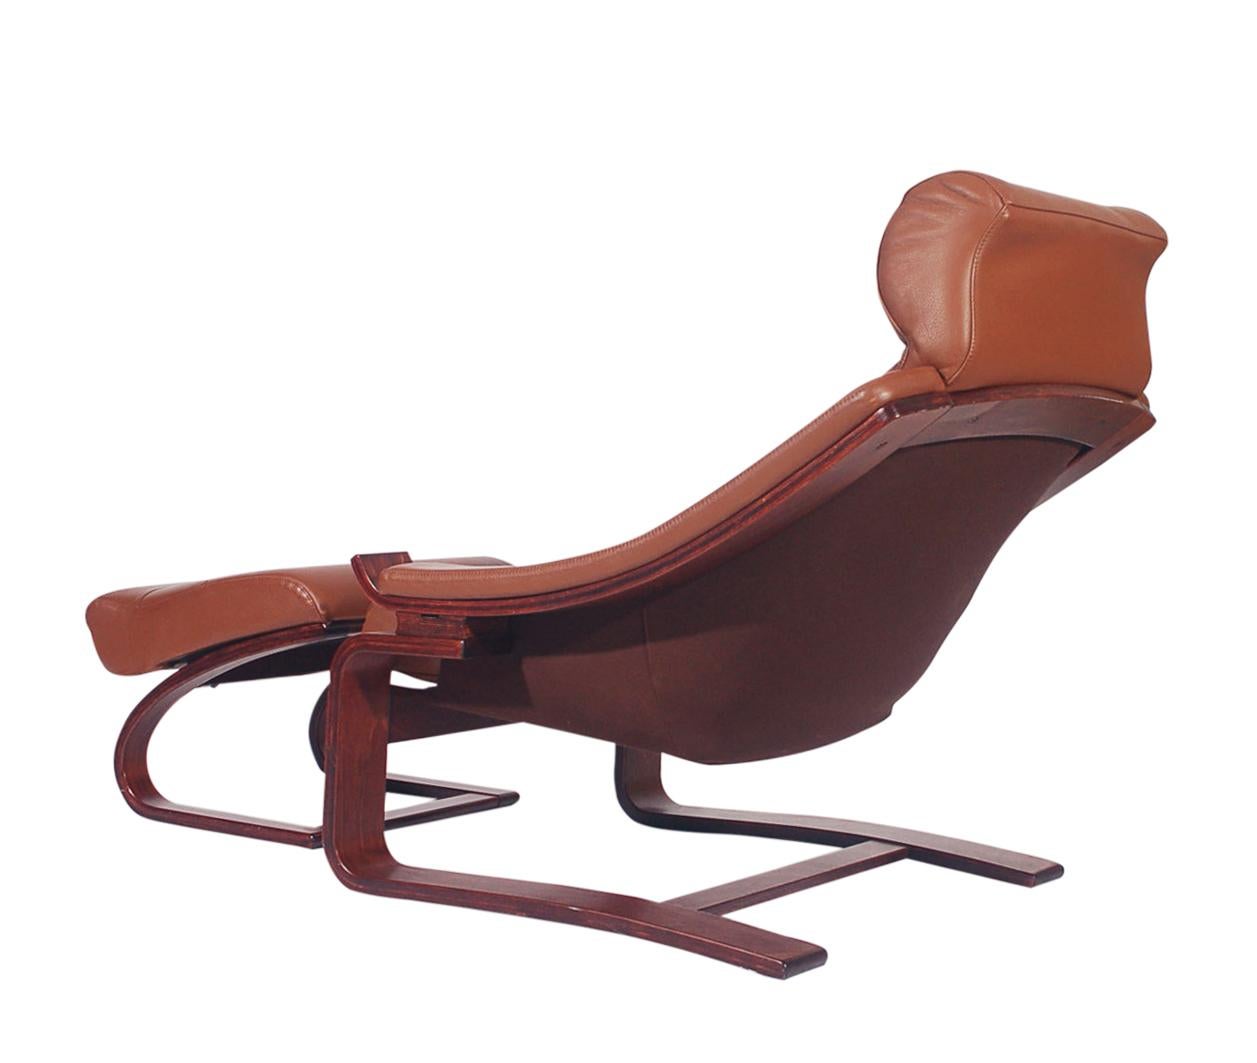 A super chic leather lounge chair and ottoman from Norway circa 1980s. This chair features solid rosewood stained wood construction with gorgeous cognac leather upholstery. Marked: NORWAY - Very well cared for and in very good condition.